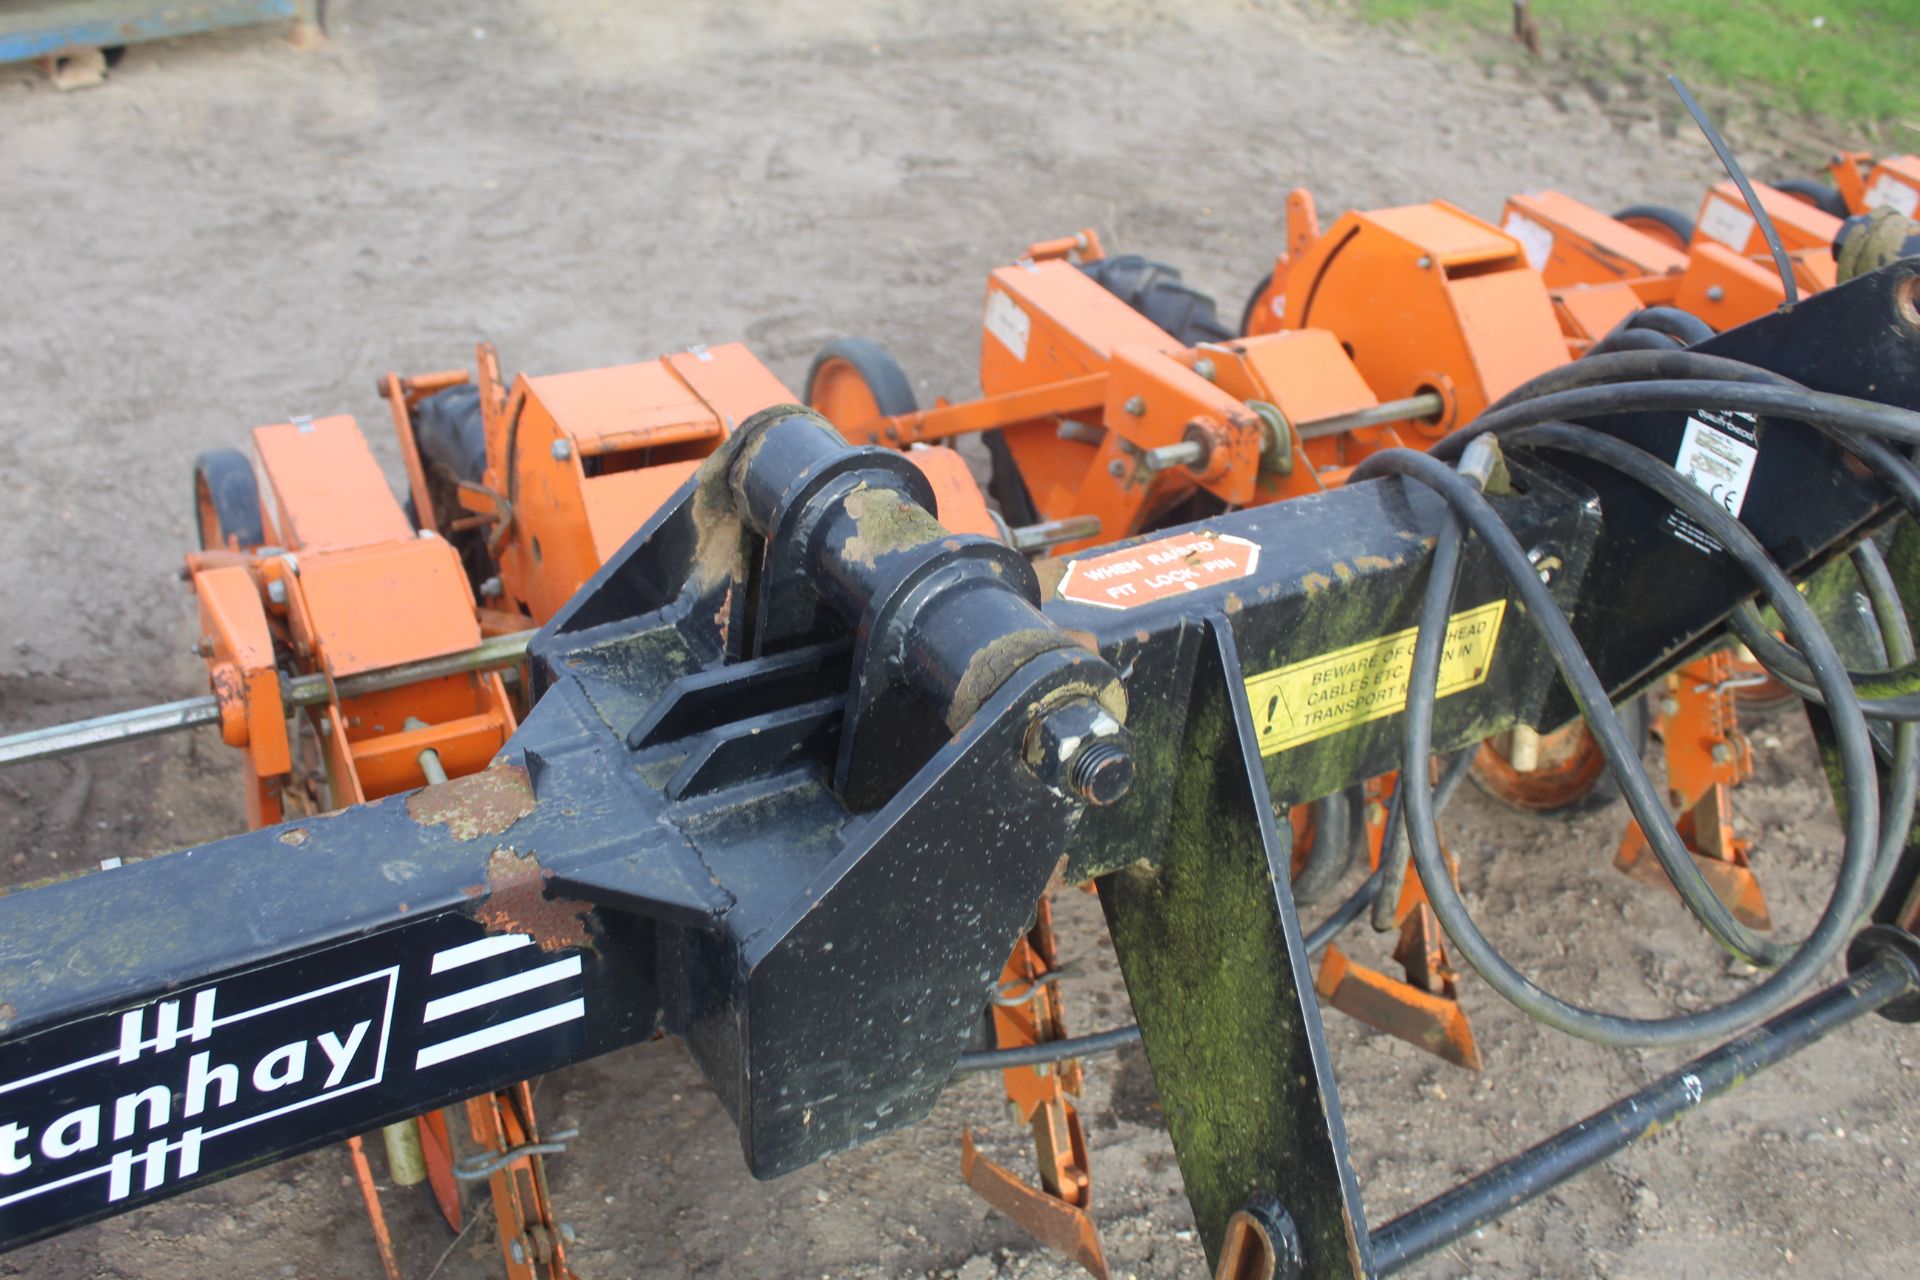 Stanhay Rallye 592 hdraulic folding 12 row beet drill. With bout markers. For spares or repair. V - Bild 26 aus 26